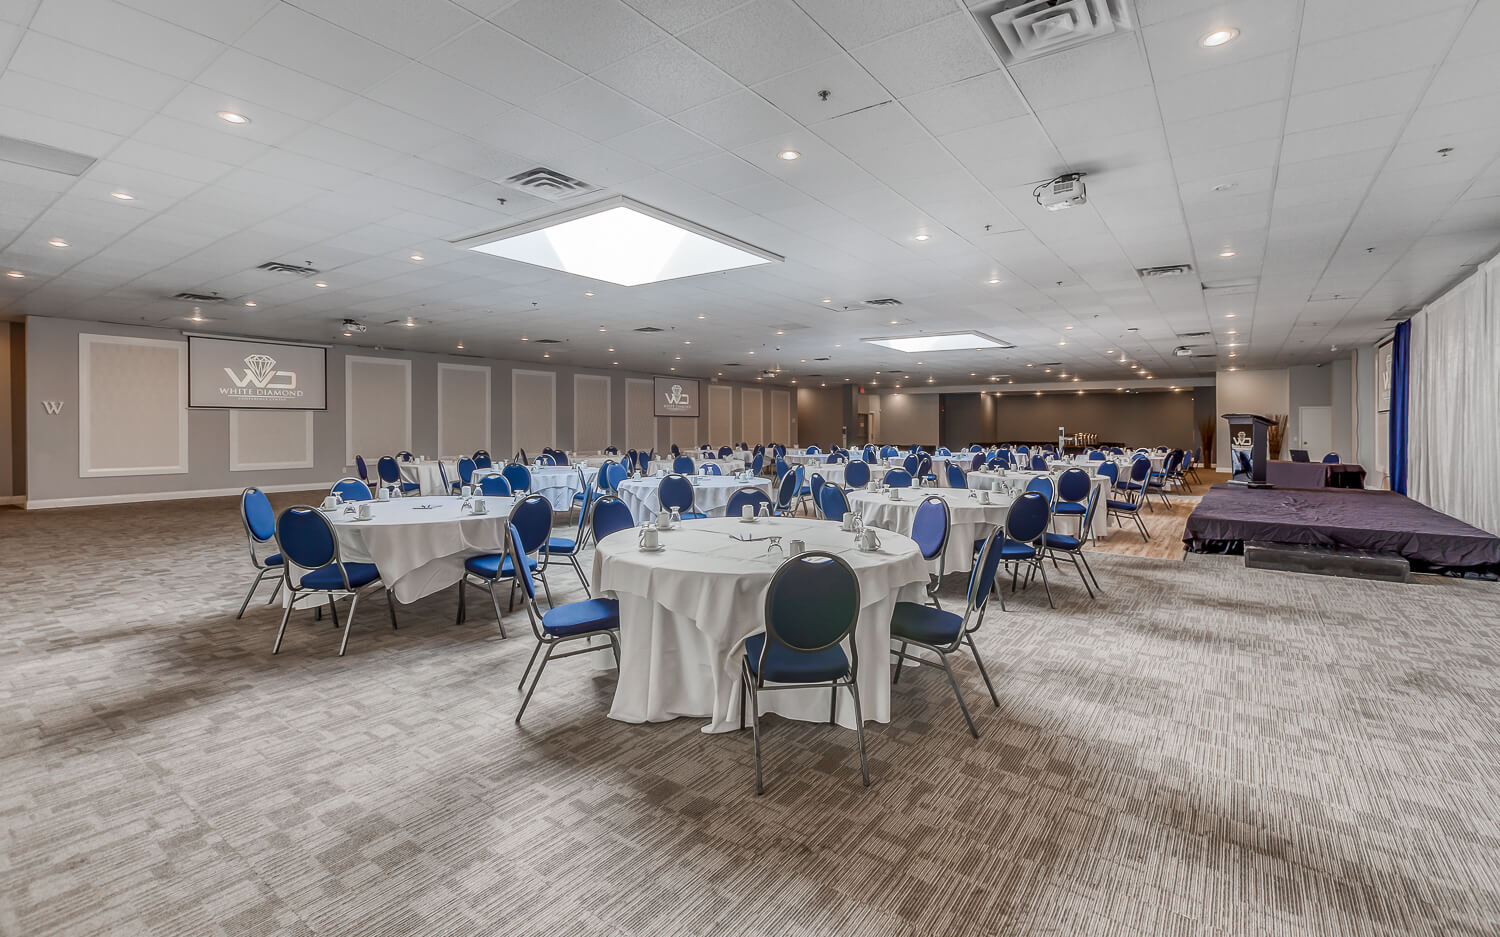 Why Choose White Diamond Conference Center instead of a community hall